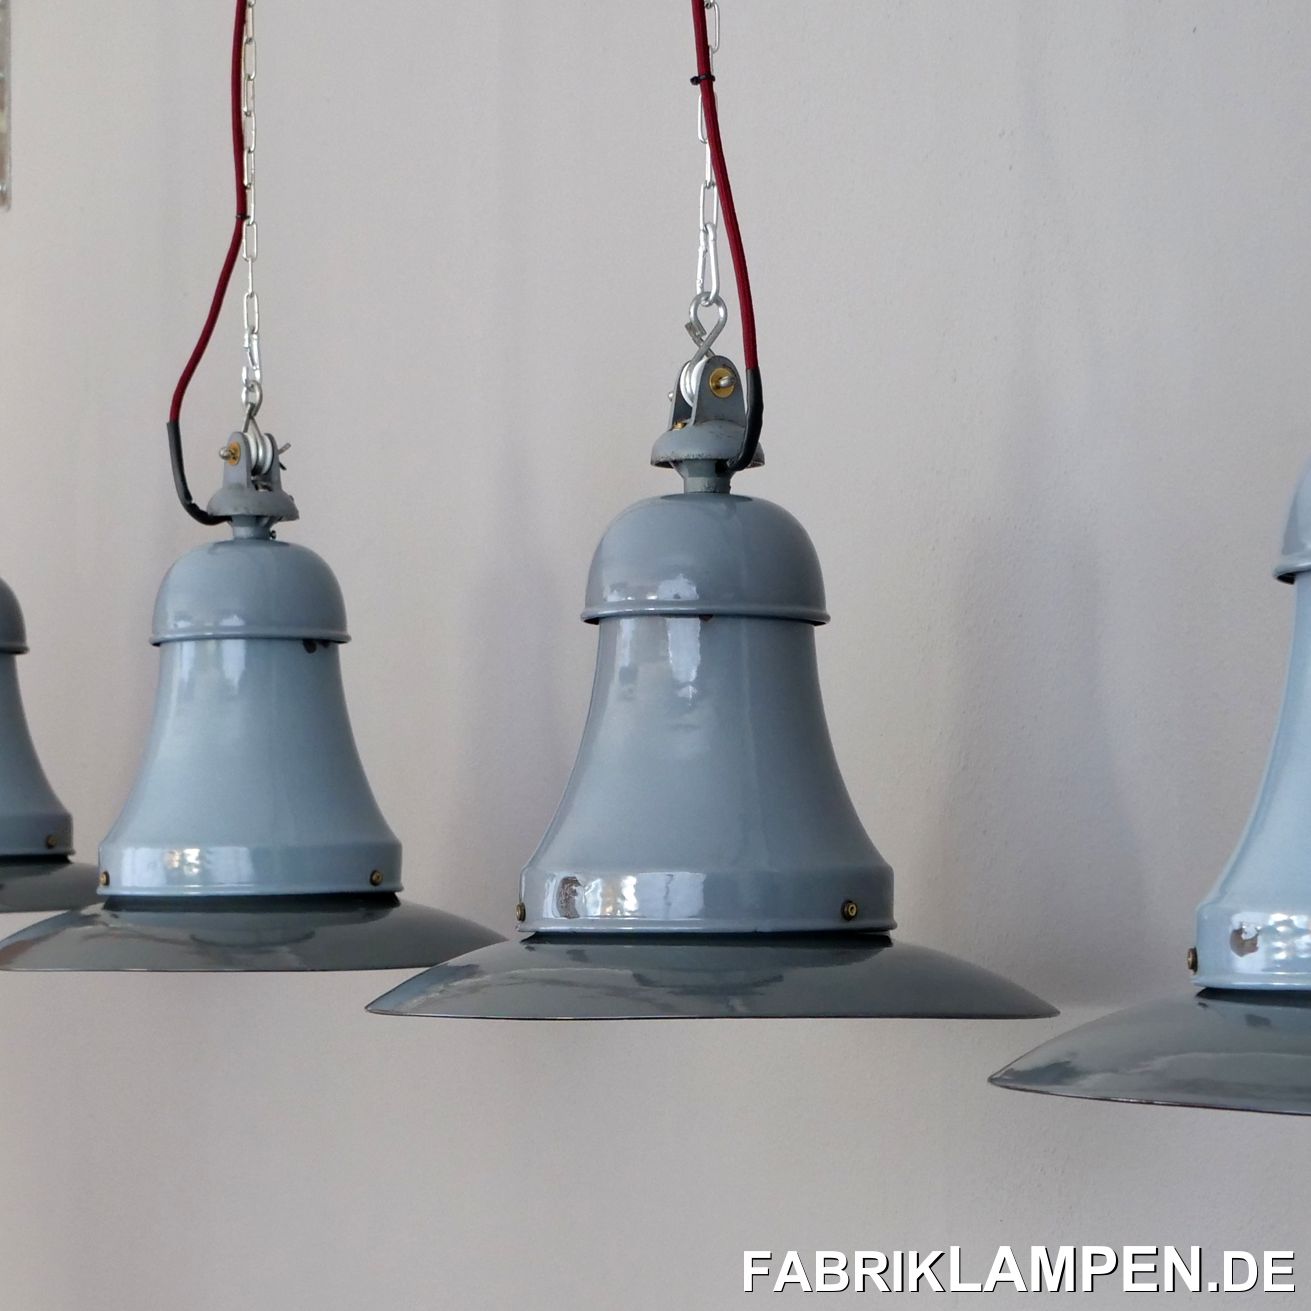  Old industrial lamps, factory lamps with two bulbholders from Siemens. We recently bought these lamps from an old hall in Hessen. The lamps were on duty until the last minute in the heated hall and accordingly they are very well preserved for their age. The original suspensions with the porcelain rolls are also available. These lamps were usually used under harsh conditions and have massive signs of use - this condition in such a quantity is very rare these days.The factory lamps have very little traces of the past decades (chipping, rust spots, scratches, discoloration, etc.), primarily at the bottom of the screws. The shades are darker, the necks lighter - Lamps with parts in deliberately different colors are typical of the German production of the time. They have been restored: cleaned, preserved and newly electrified, with new E27 ceramic sockets.Material: light blue / gray (white inside) enameled steel sheet.The old industrial lamps are supplied with a 2 meter textile cable of your choice (other lengths are of course possible) and a solid hanging loop for safe hanging. For a surcharge, the lamps can also be supplied with chain or tubular steel suspension. We can also offer canopies.The dimensions: height of the lamps approx. 40 cm (15,7 inches with suspension), diameter approx. 42 cm (16,5 inches), weight approx. 3 kg. We also have these lamps in stock with a diameter of 30 cm (with one socket), some with glasses - contact us for prices and further details! 